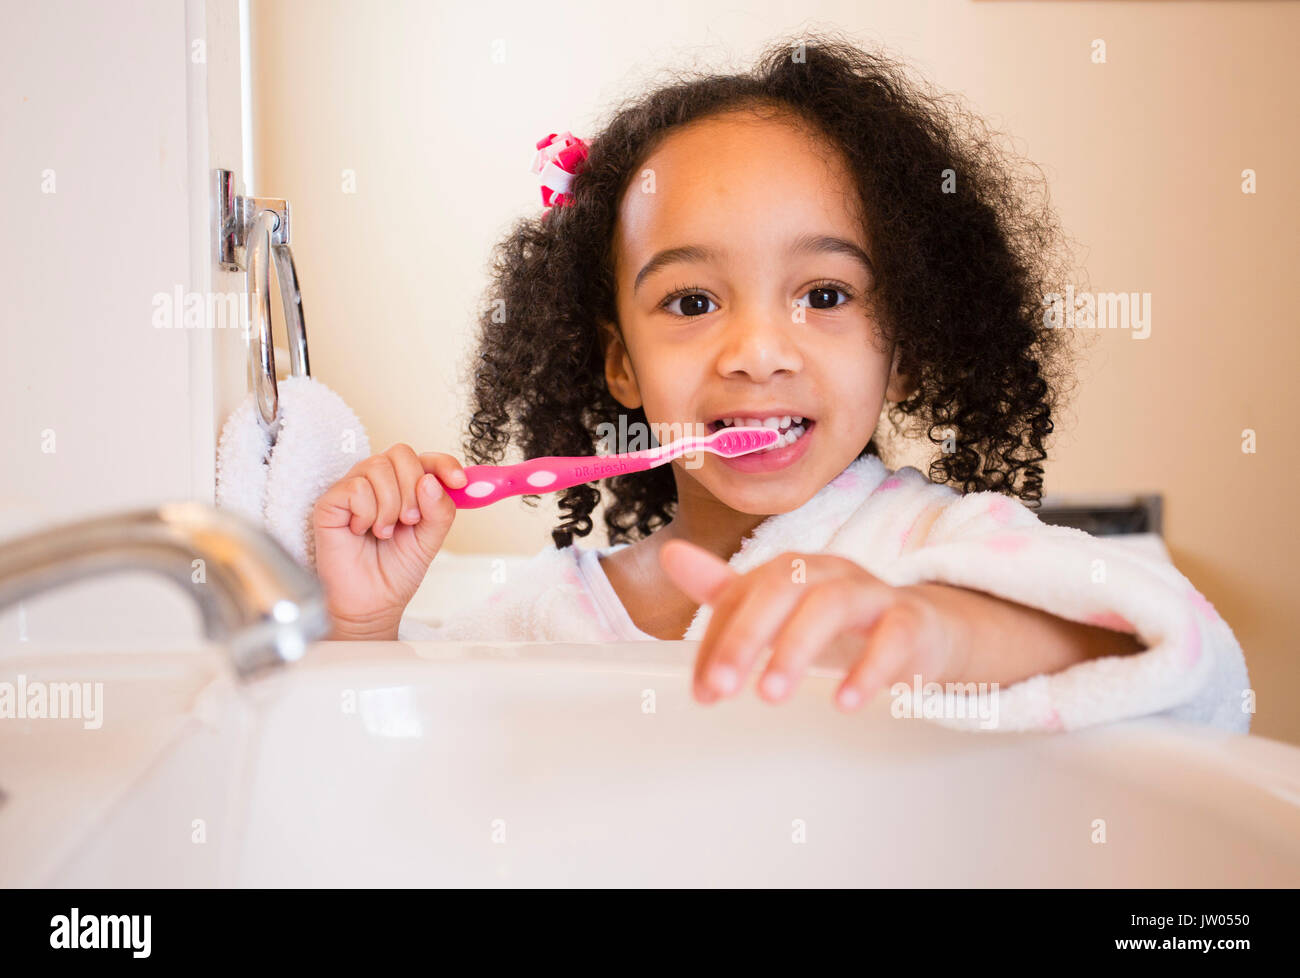 A young, multicultural girl brushes her teeth. Stock Photo